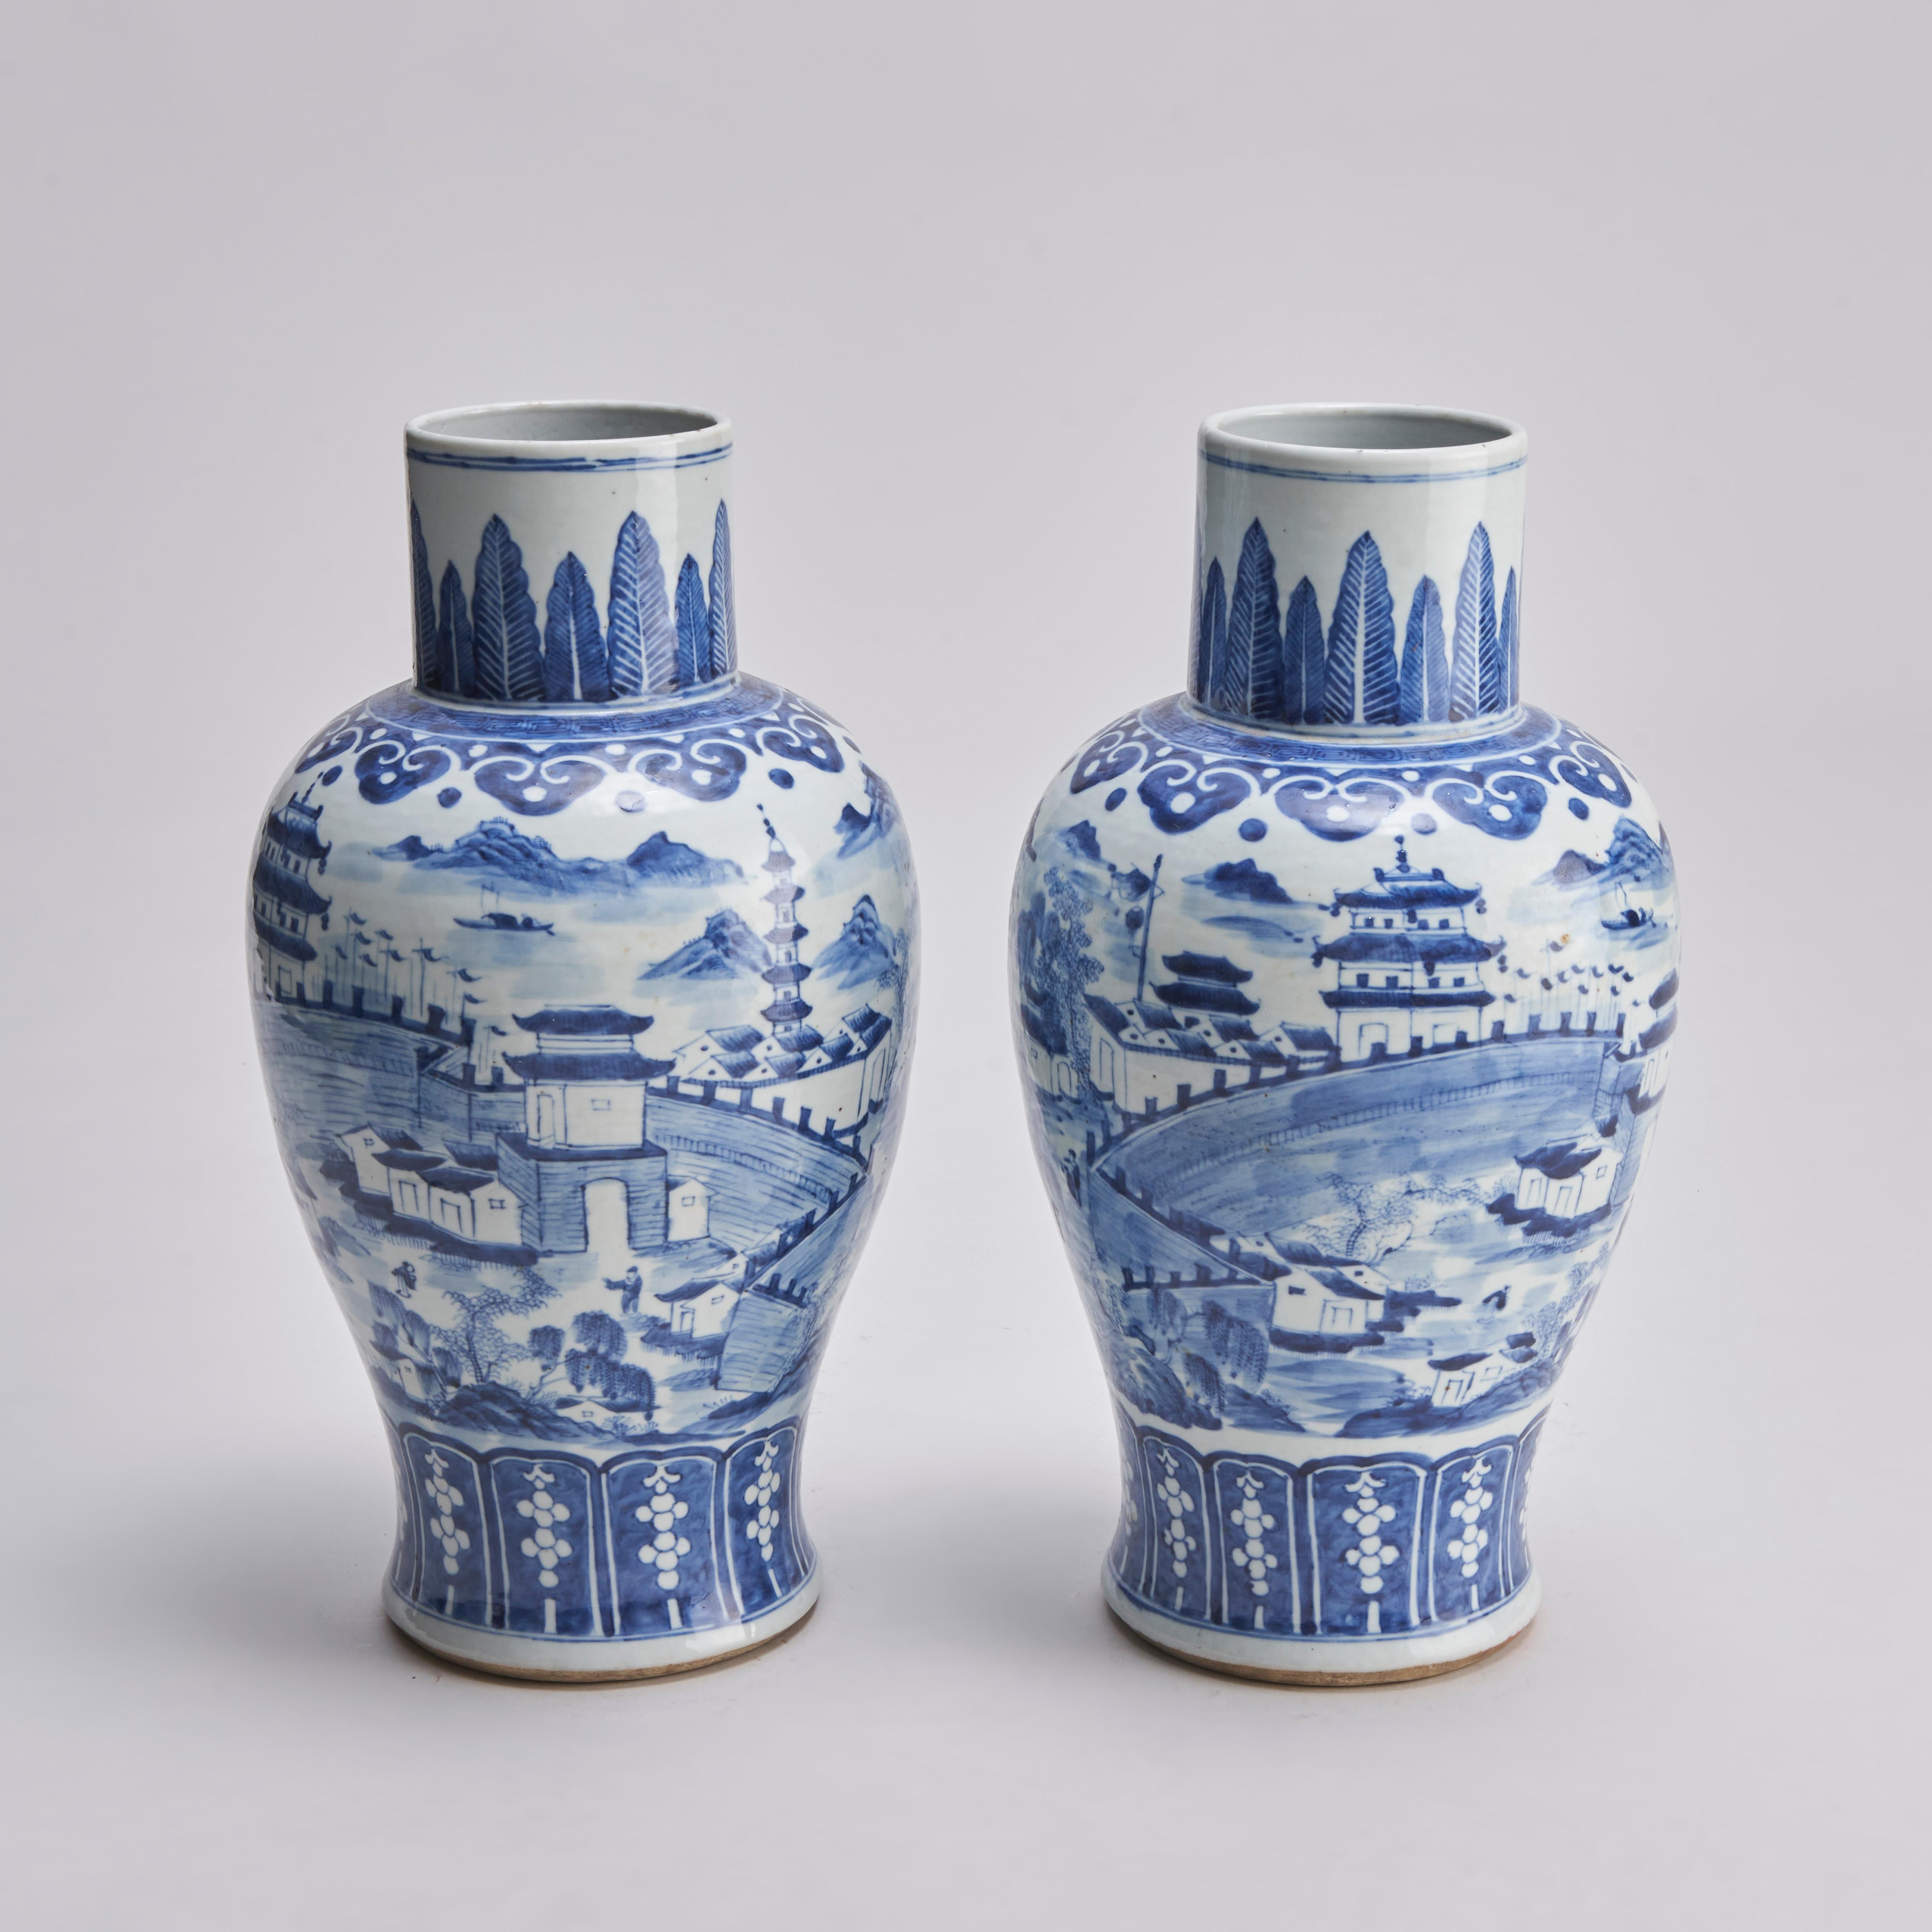 A pair of 19th century Chinese Blue and White vases with wrap-around decoration of a walled Temple complex featuring two large pagodas. The neck with a Ruyi design to the shoulder and a phoenix feather collar above.
Contact us for further